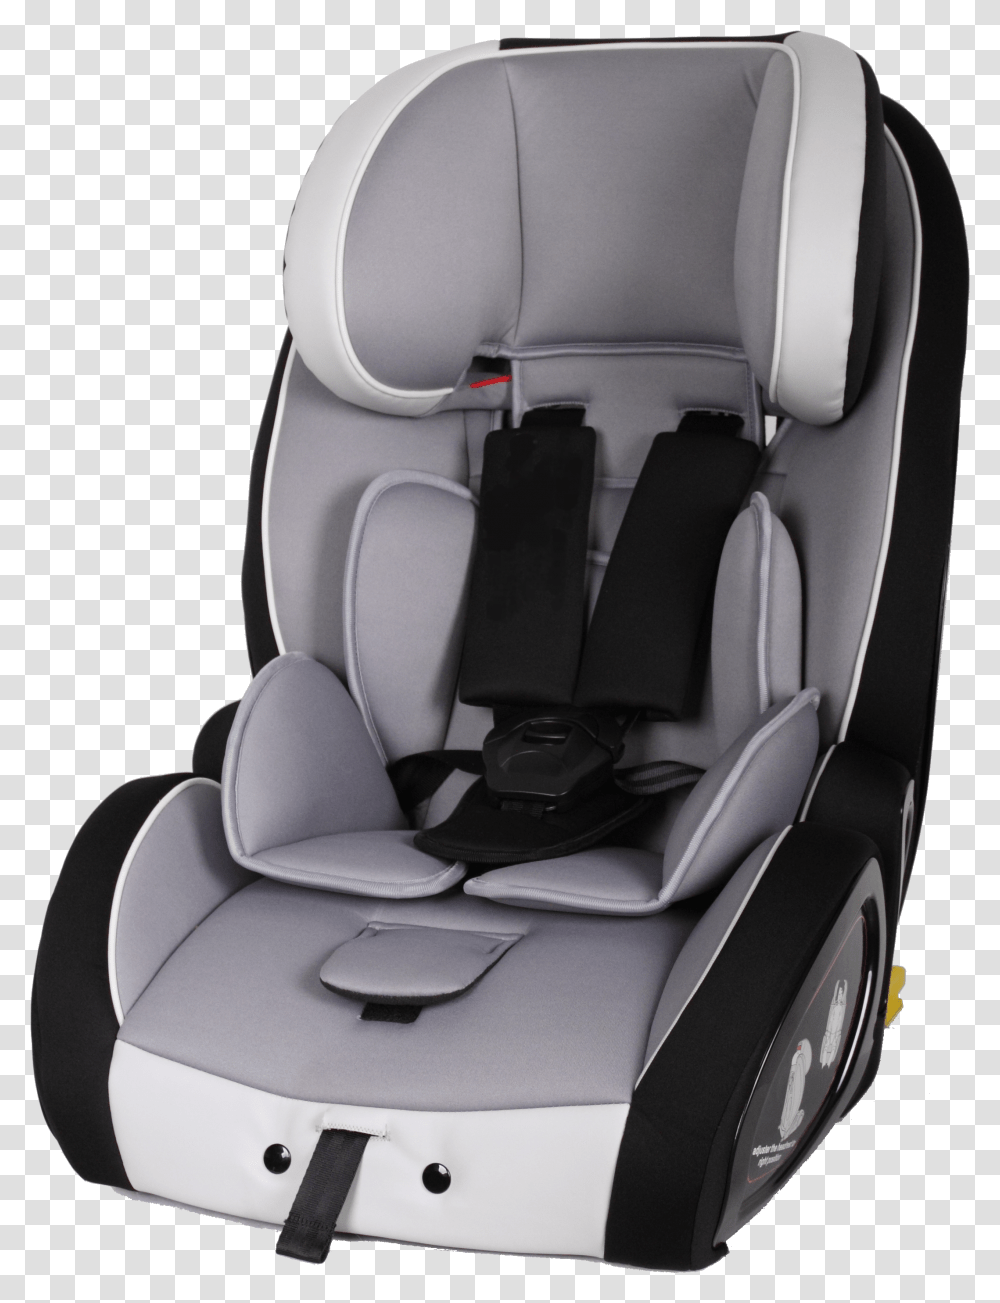 Booster Seat Baby Car Seat Transparent Png